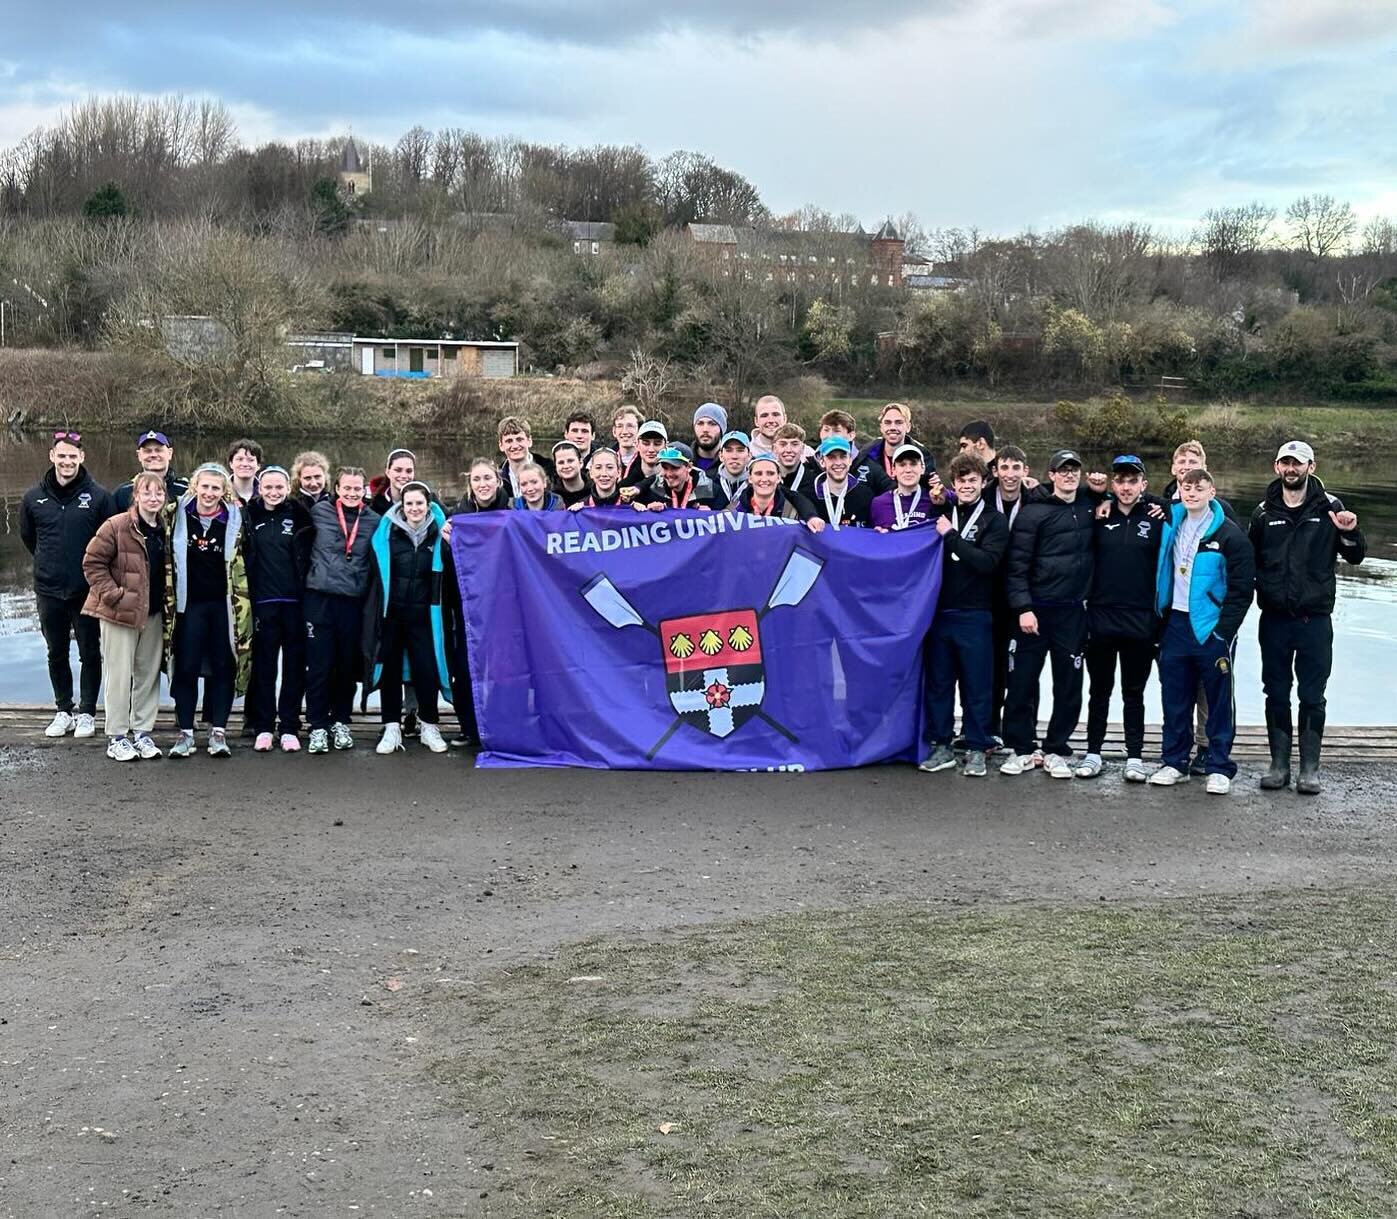 BUCS HEAD 2024 ✊

RUBC had an incredibly successful weekend at BUCS head, taking home 4 golds and a silver medal. 💜

The day started strong with the Open Championship 4x storming to victory by an impressive 31 second margin and setting the standard 